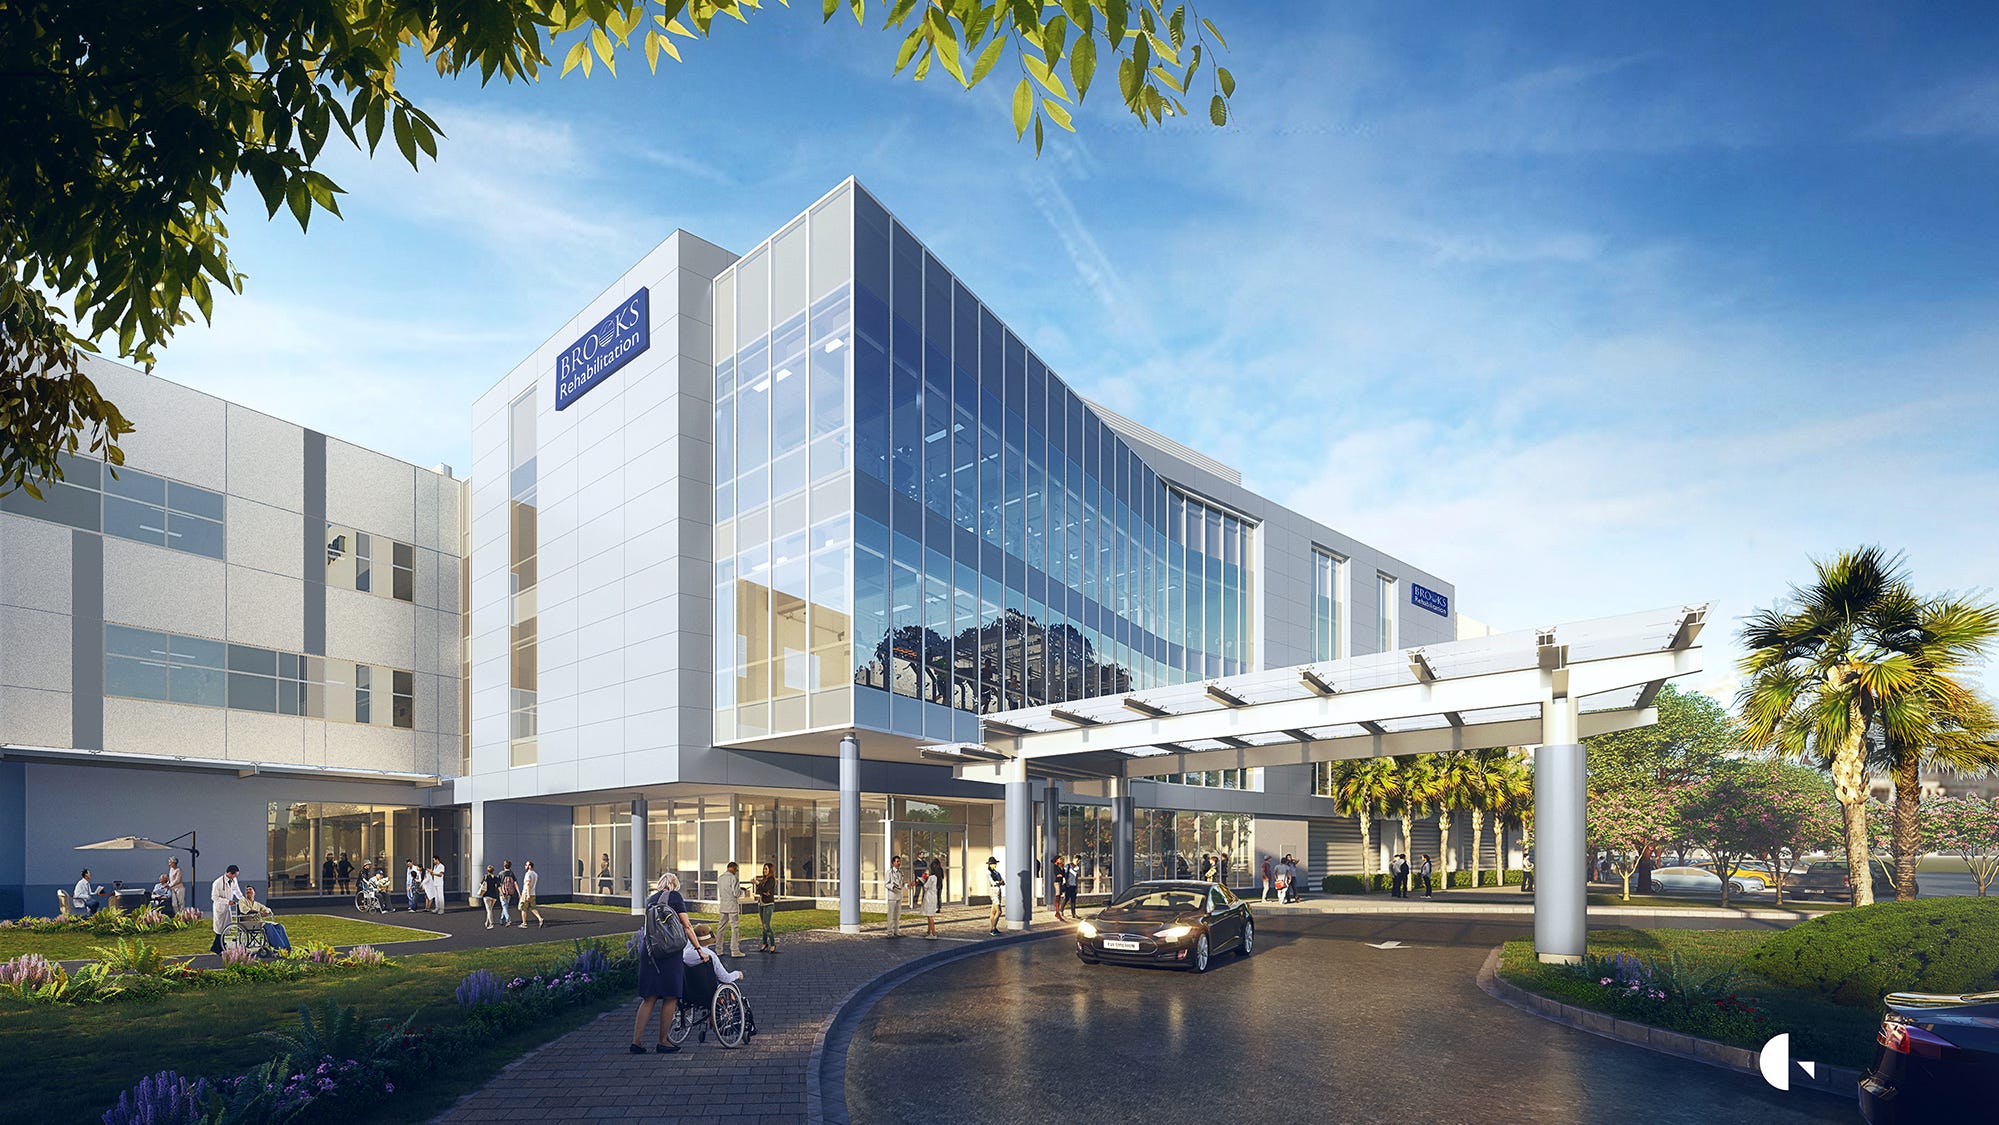 Second Brooks Rehabilitation hospital to open in 2022 in Bartram Park